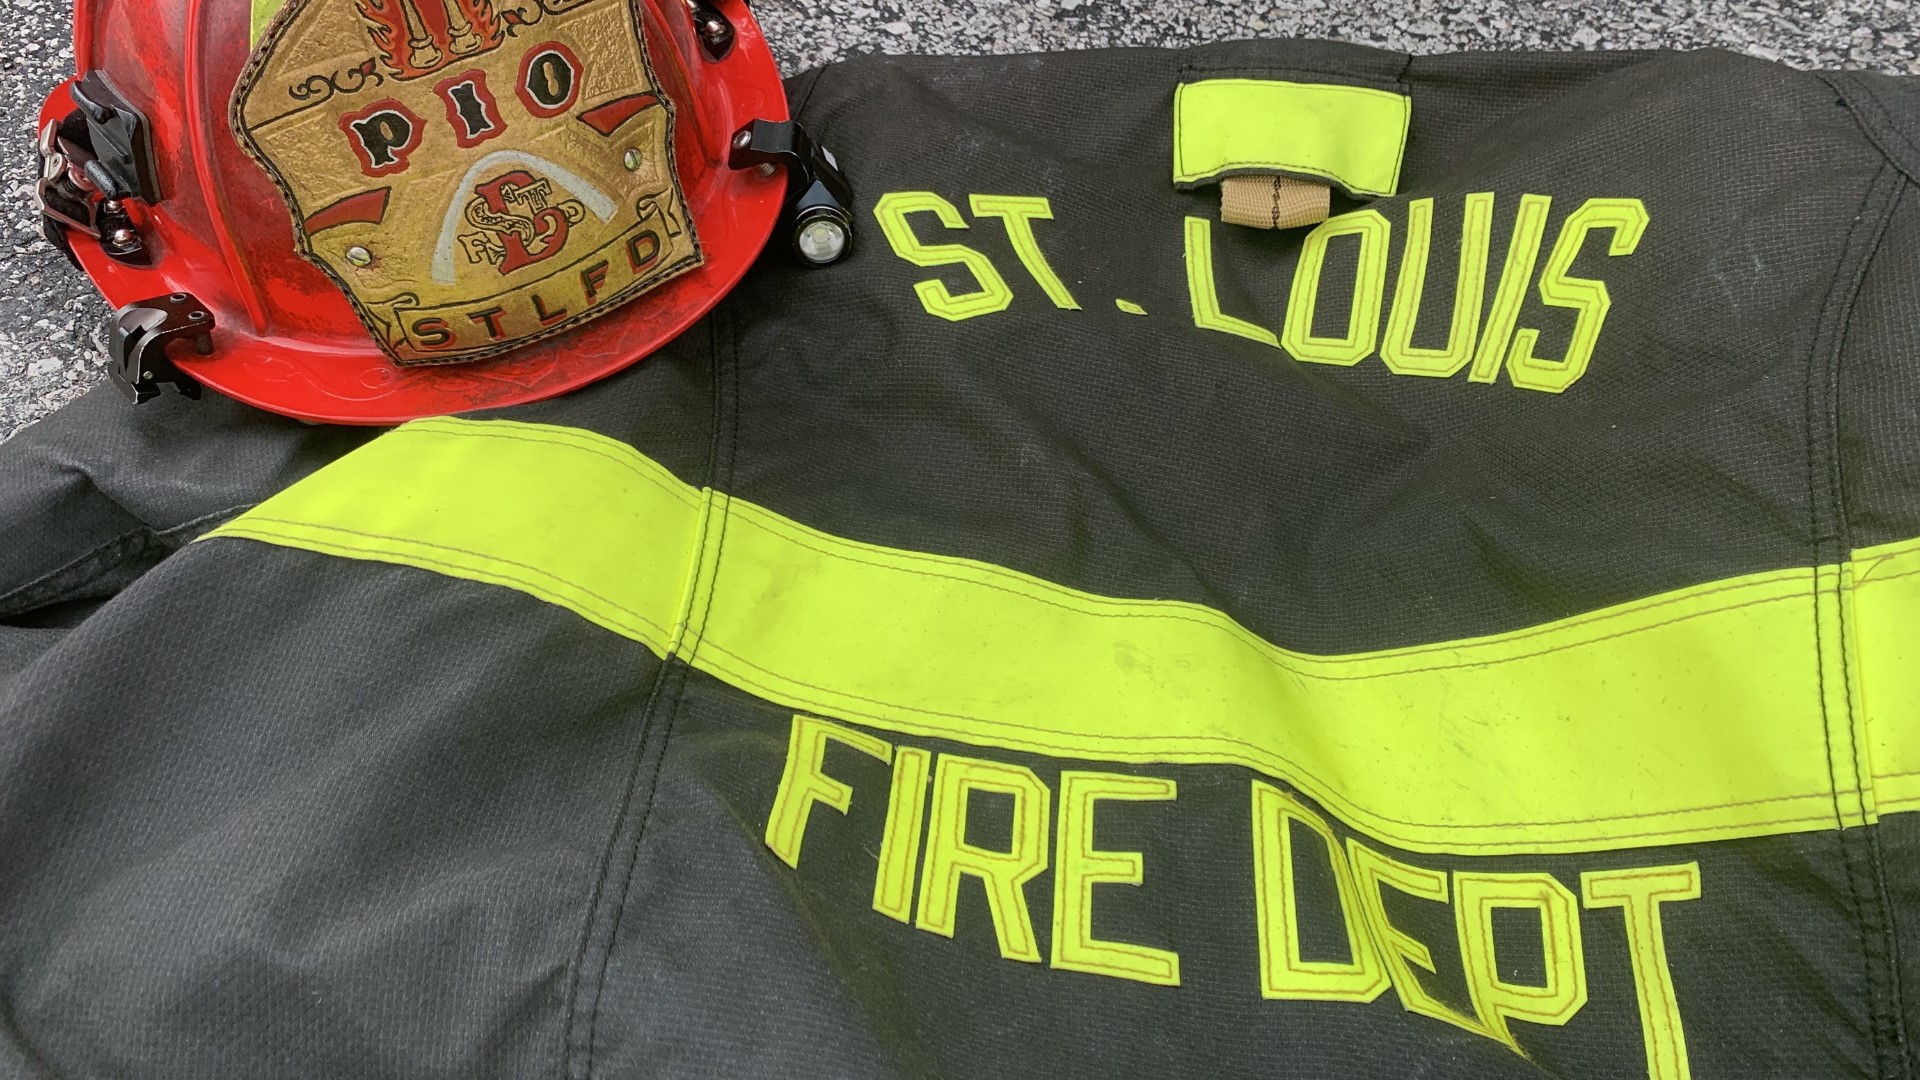 St. Louis Aldermen passed a new bill returning control of city firefighters' pension back to firefighters. Mayor Tishaura Jones said she would veto the measure.